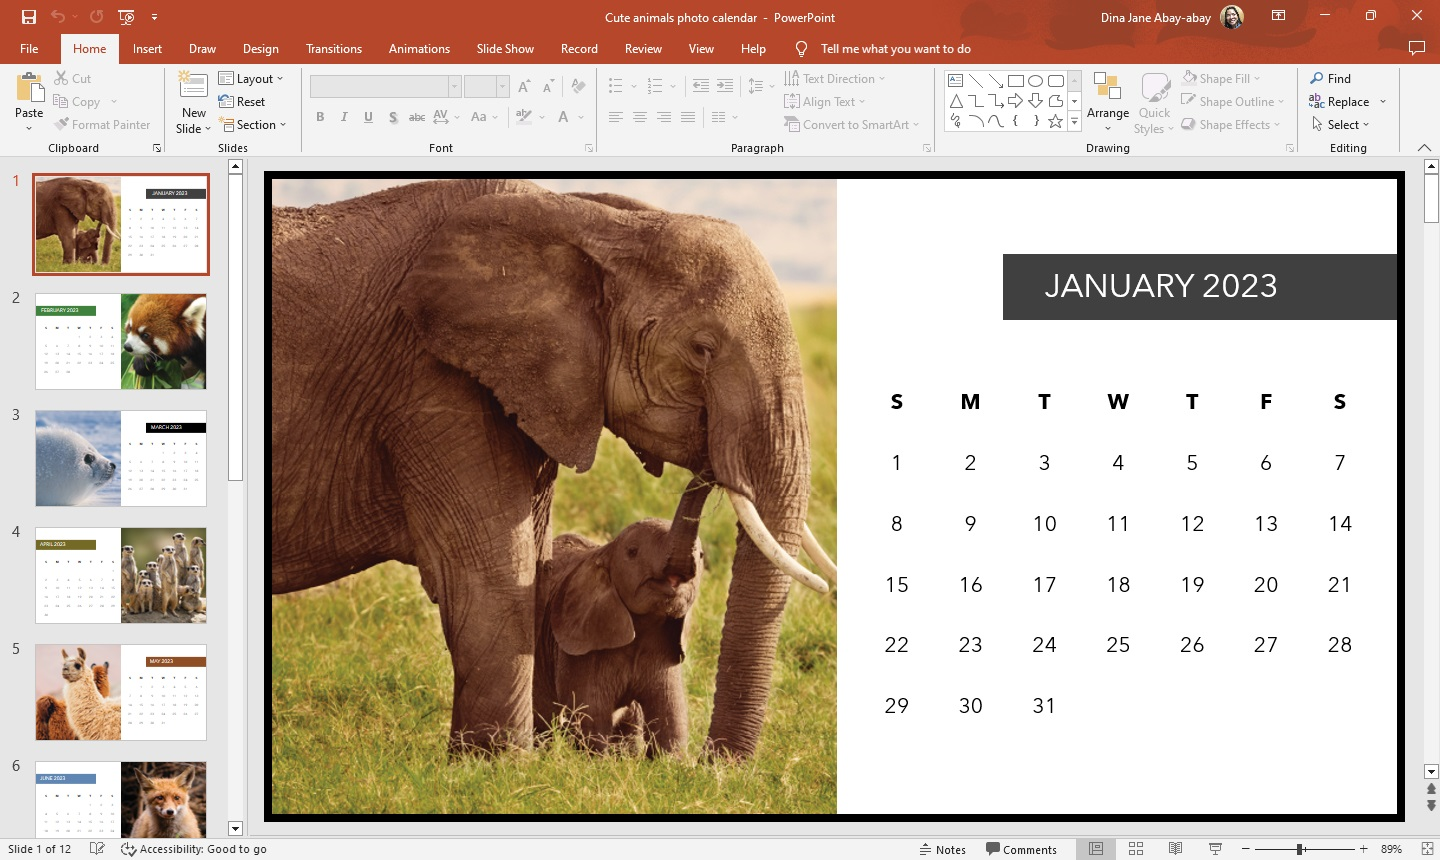 You have now use the custom calendar template on your PowerPoint